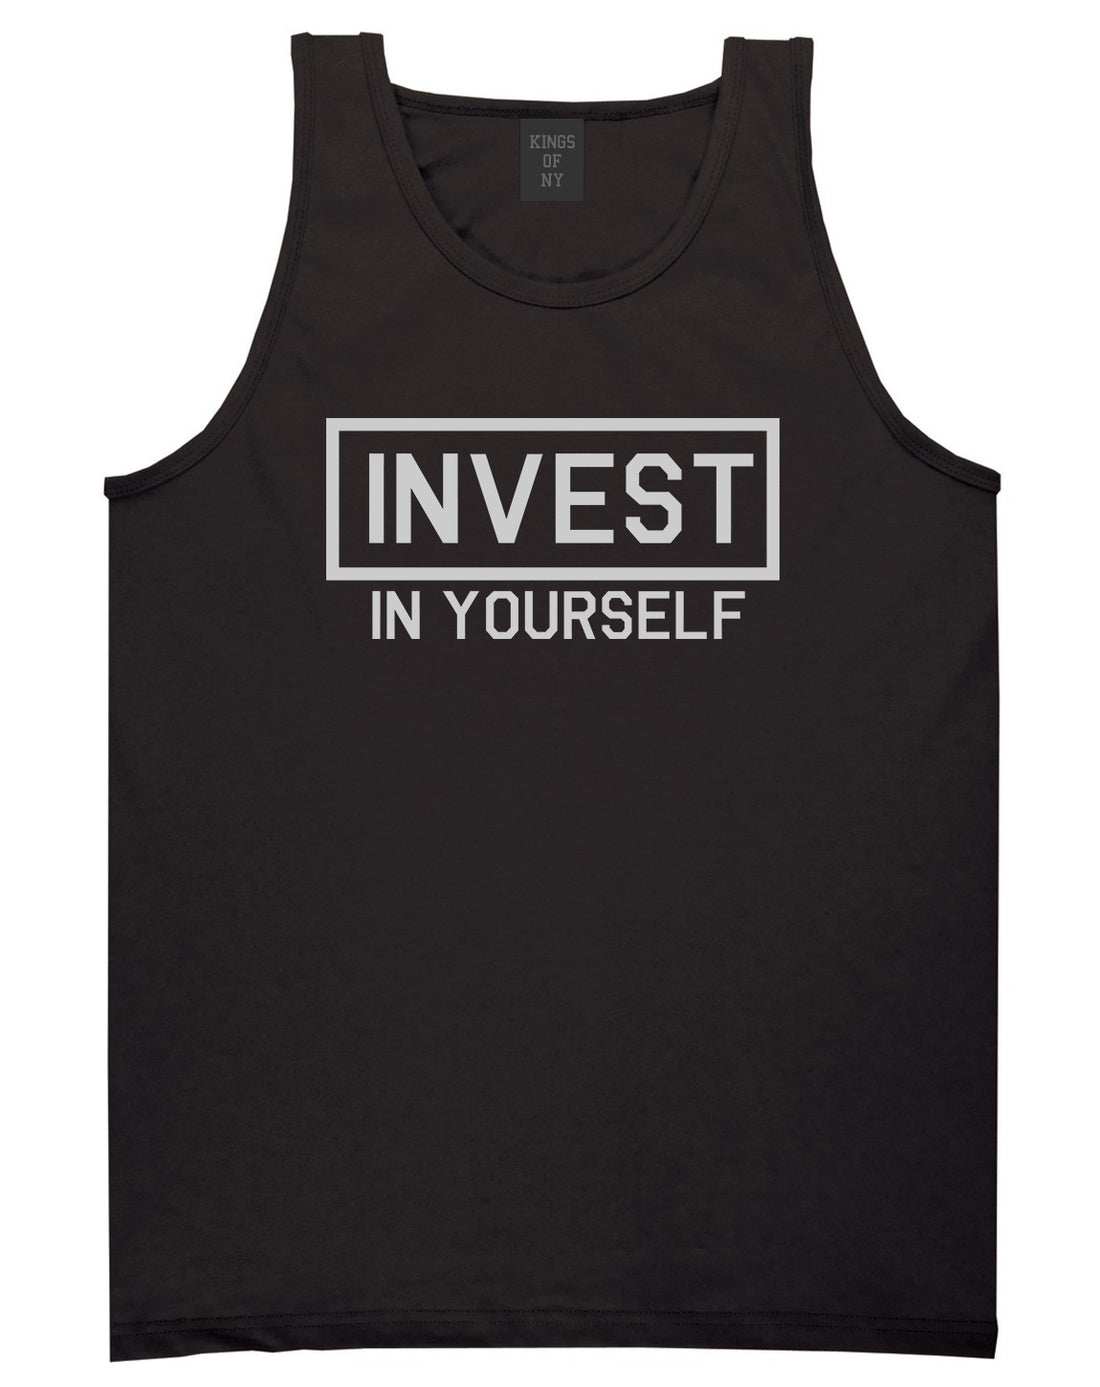 Invest In Yourself Mens Tank Top T-Shirt Black